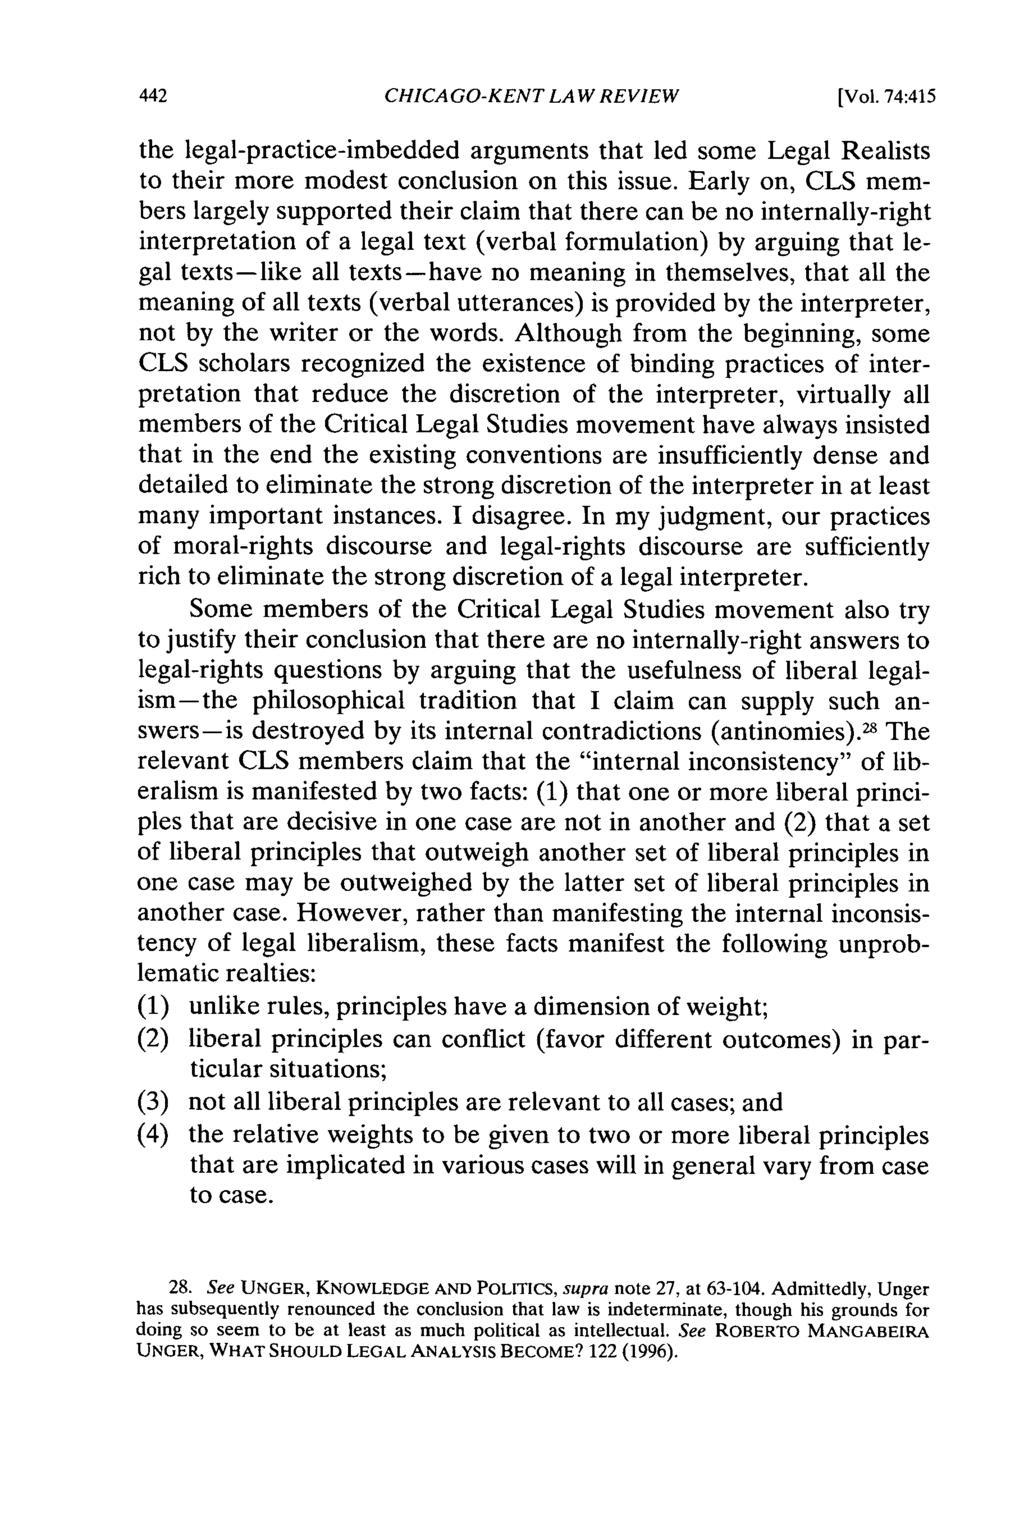 CHICAGO-KENT LAW REVIEW [Vol. 74:415 the legal-practice-imbedded arguments that led some Legal Realists to their more modest conclusion on this issue.